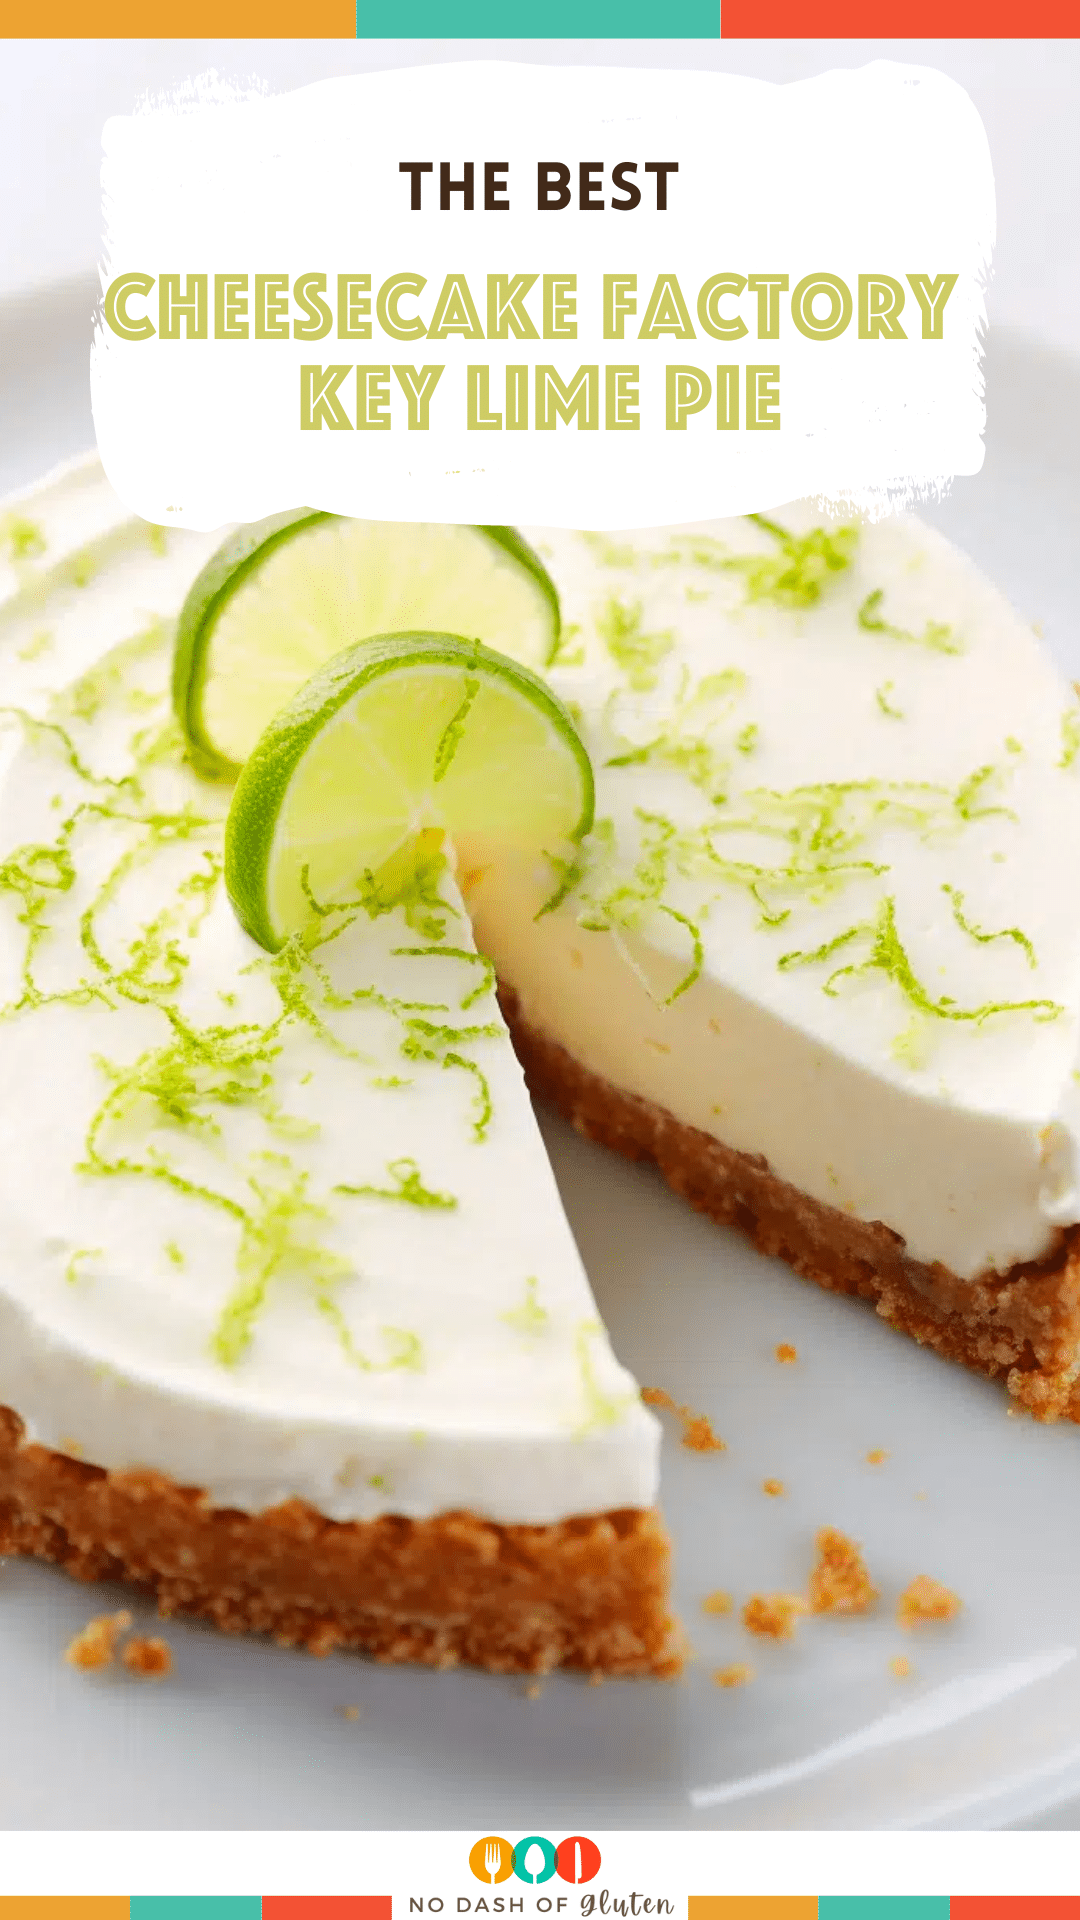 Cheesecake Factory Key Lime Pie